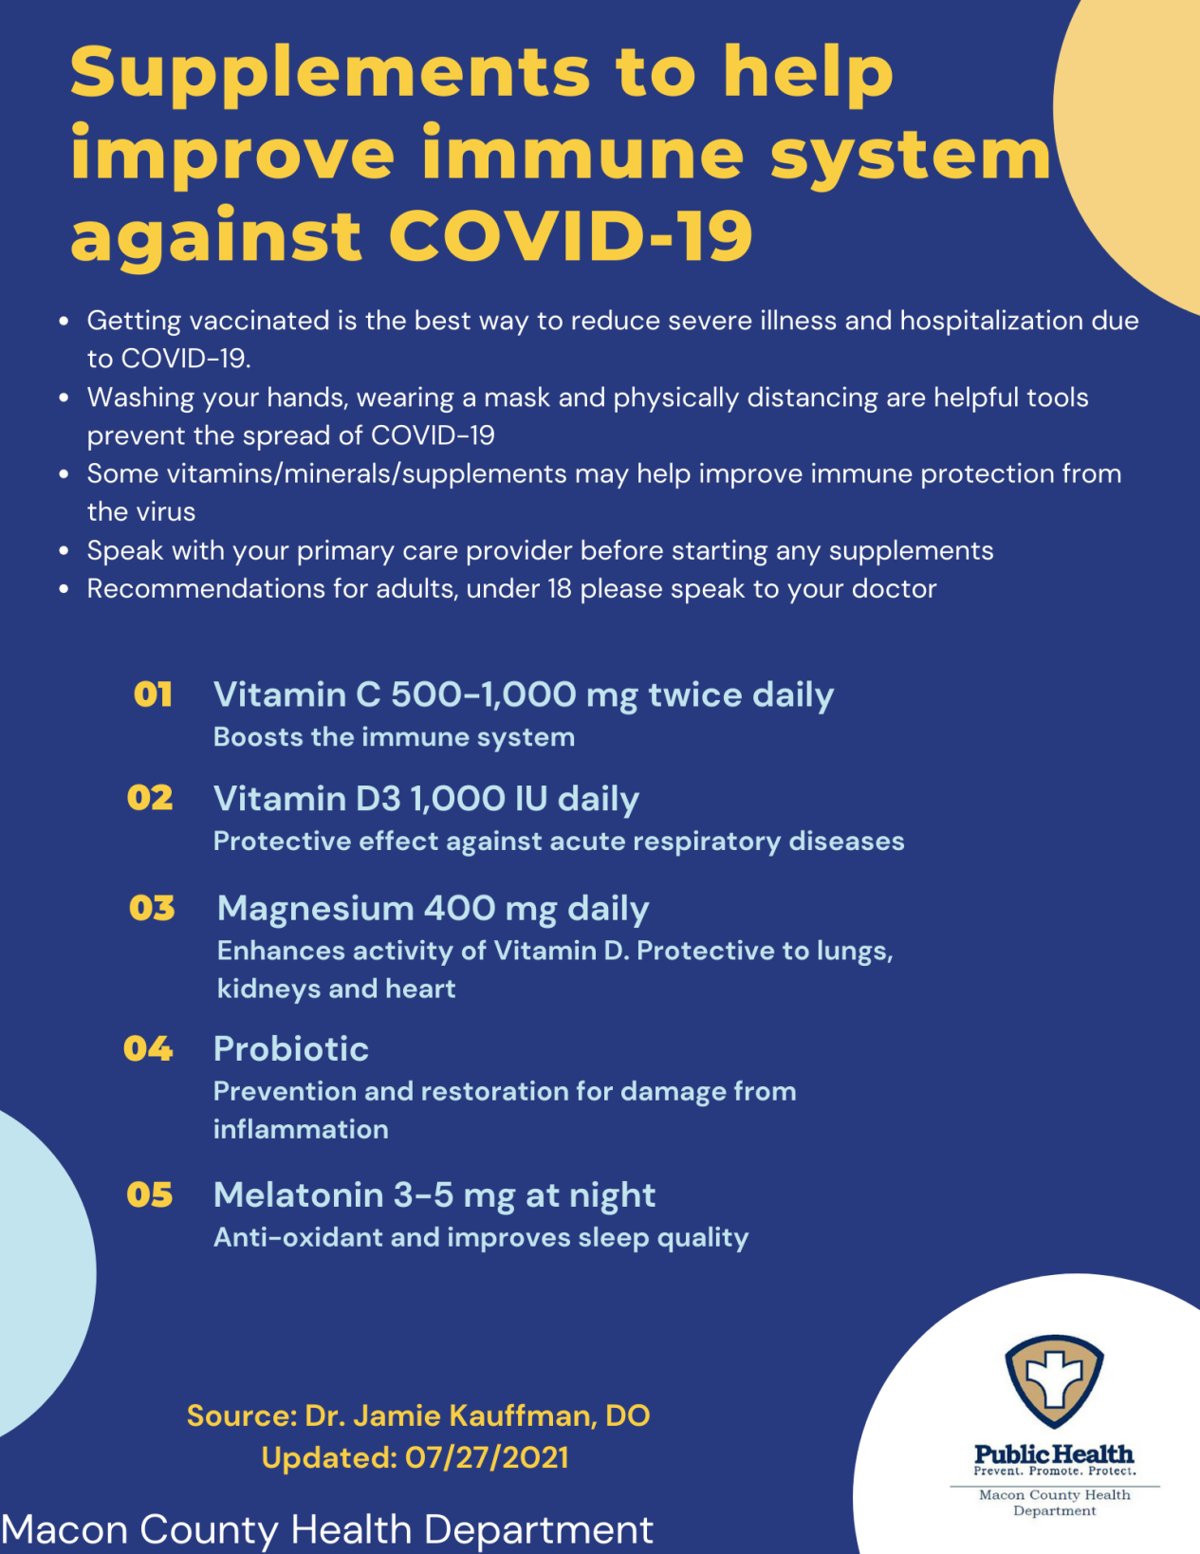 Cole County Health Department shares COVID-19 supplement recommendations